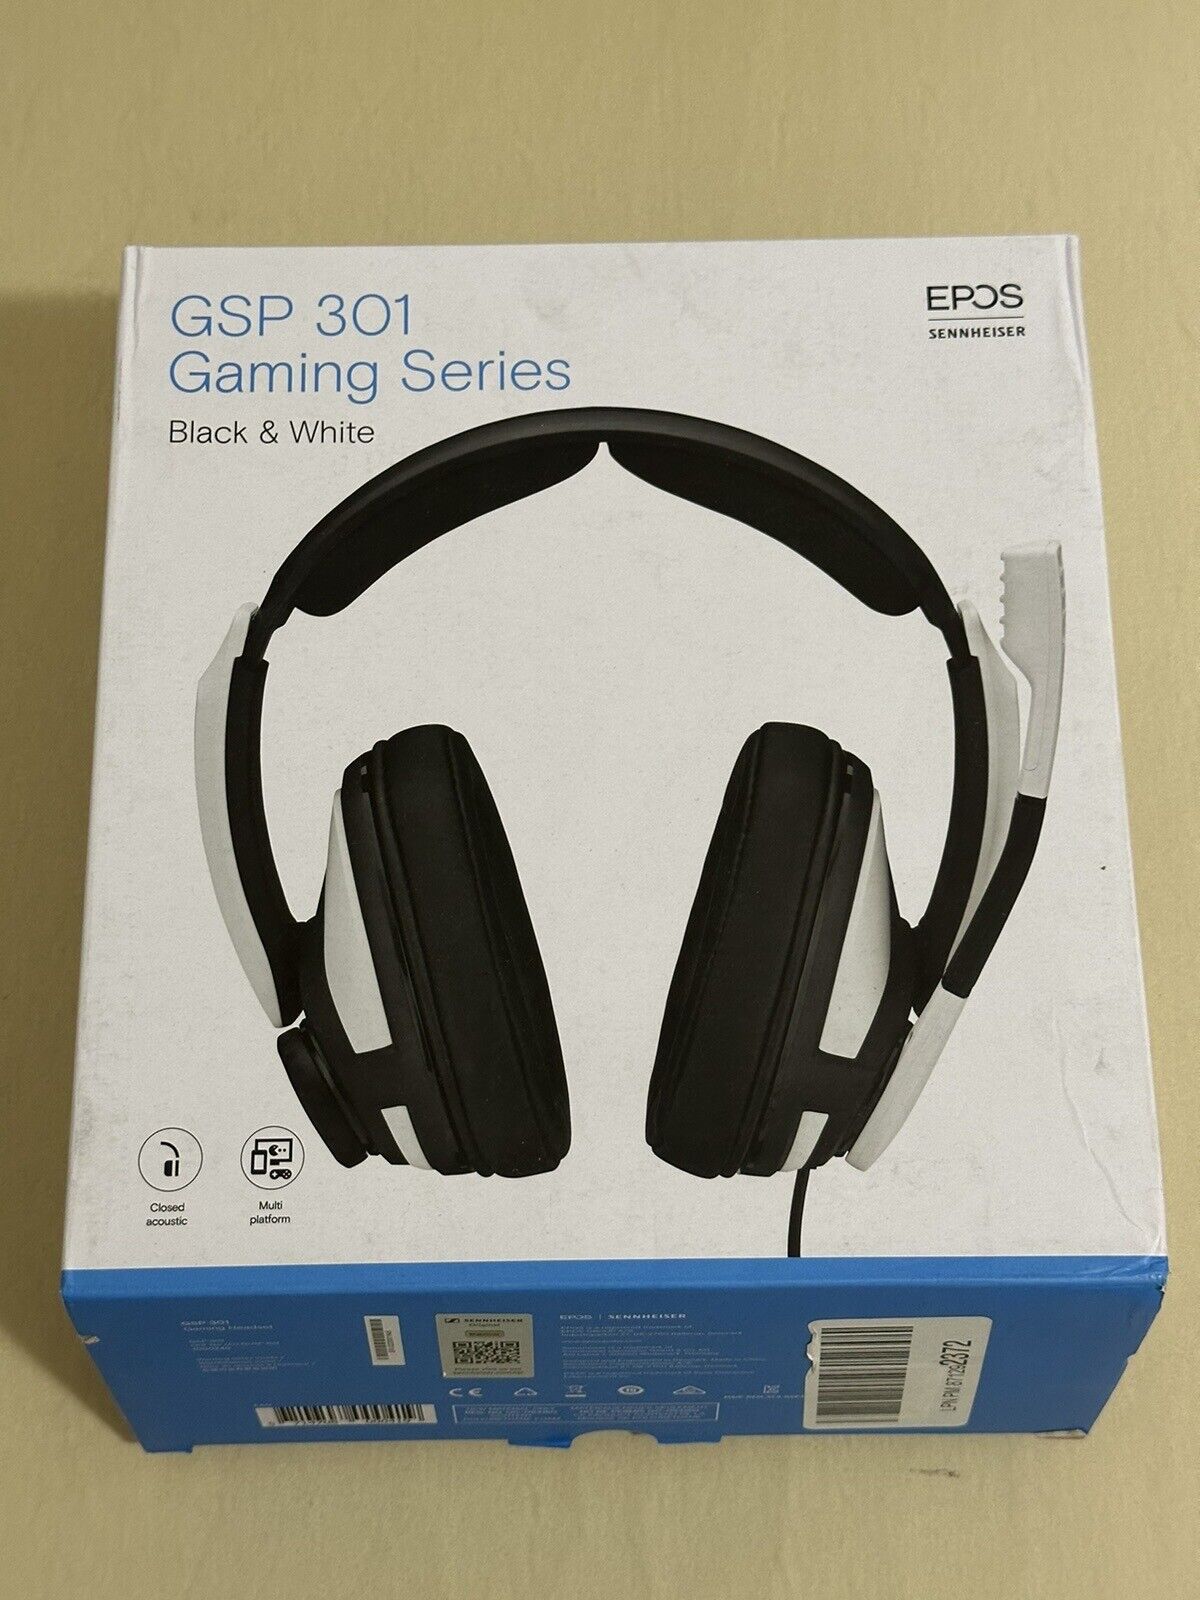 EPOS I Sennheiser GSP 301 Gaming Headset and Noise-Cancelling Mic - Open Box